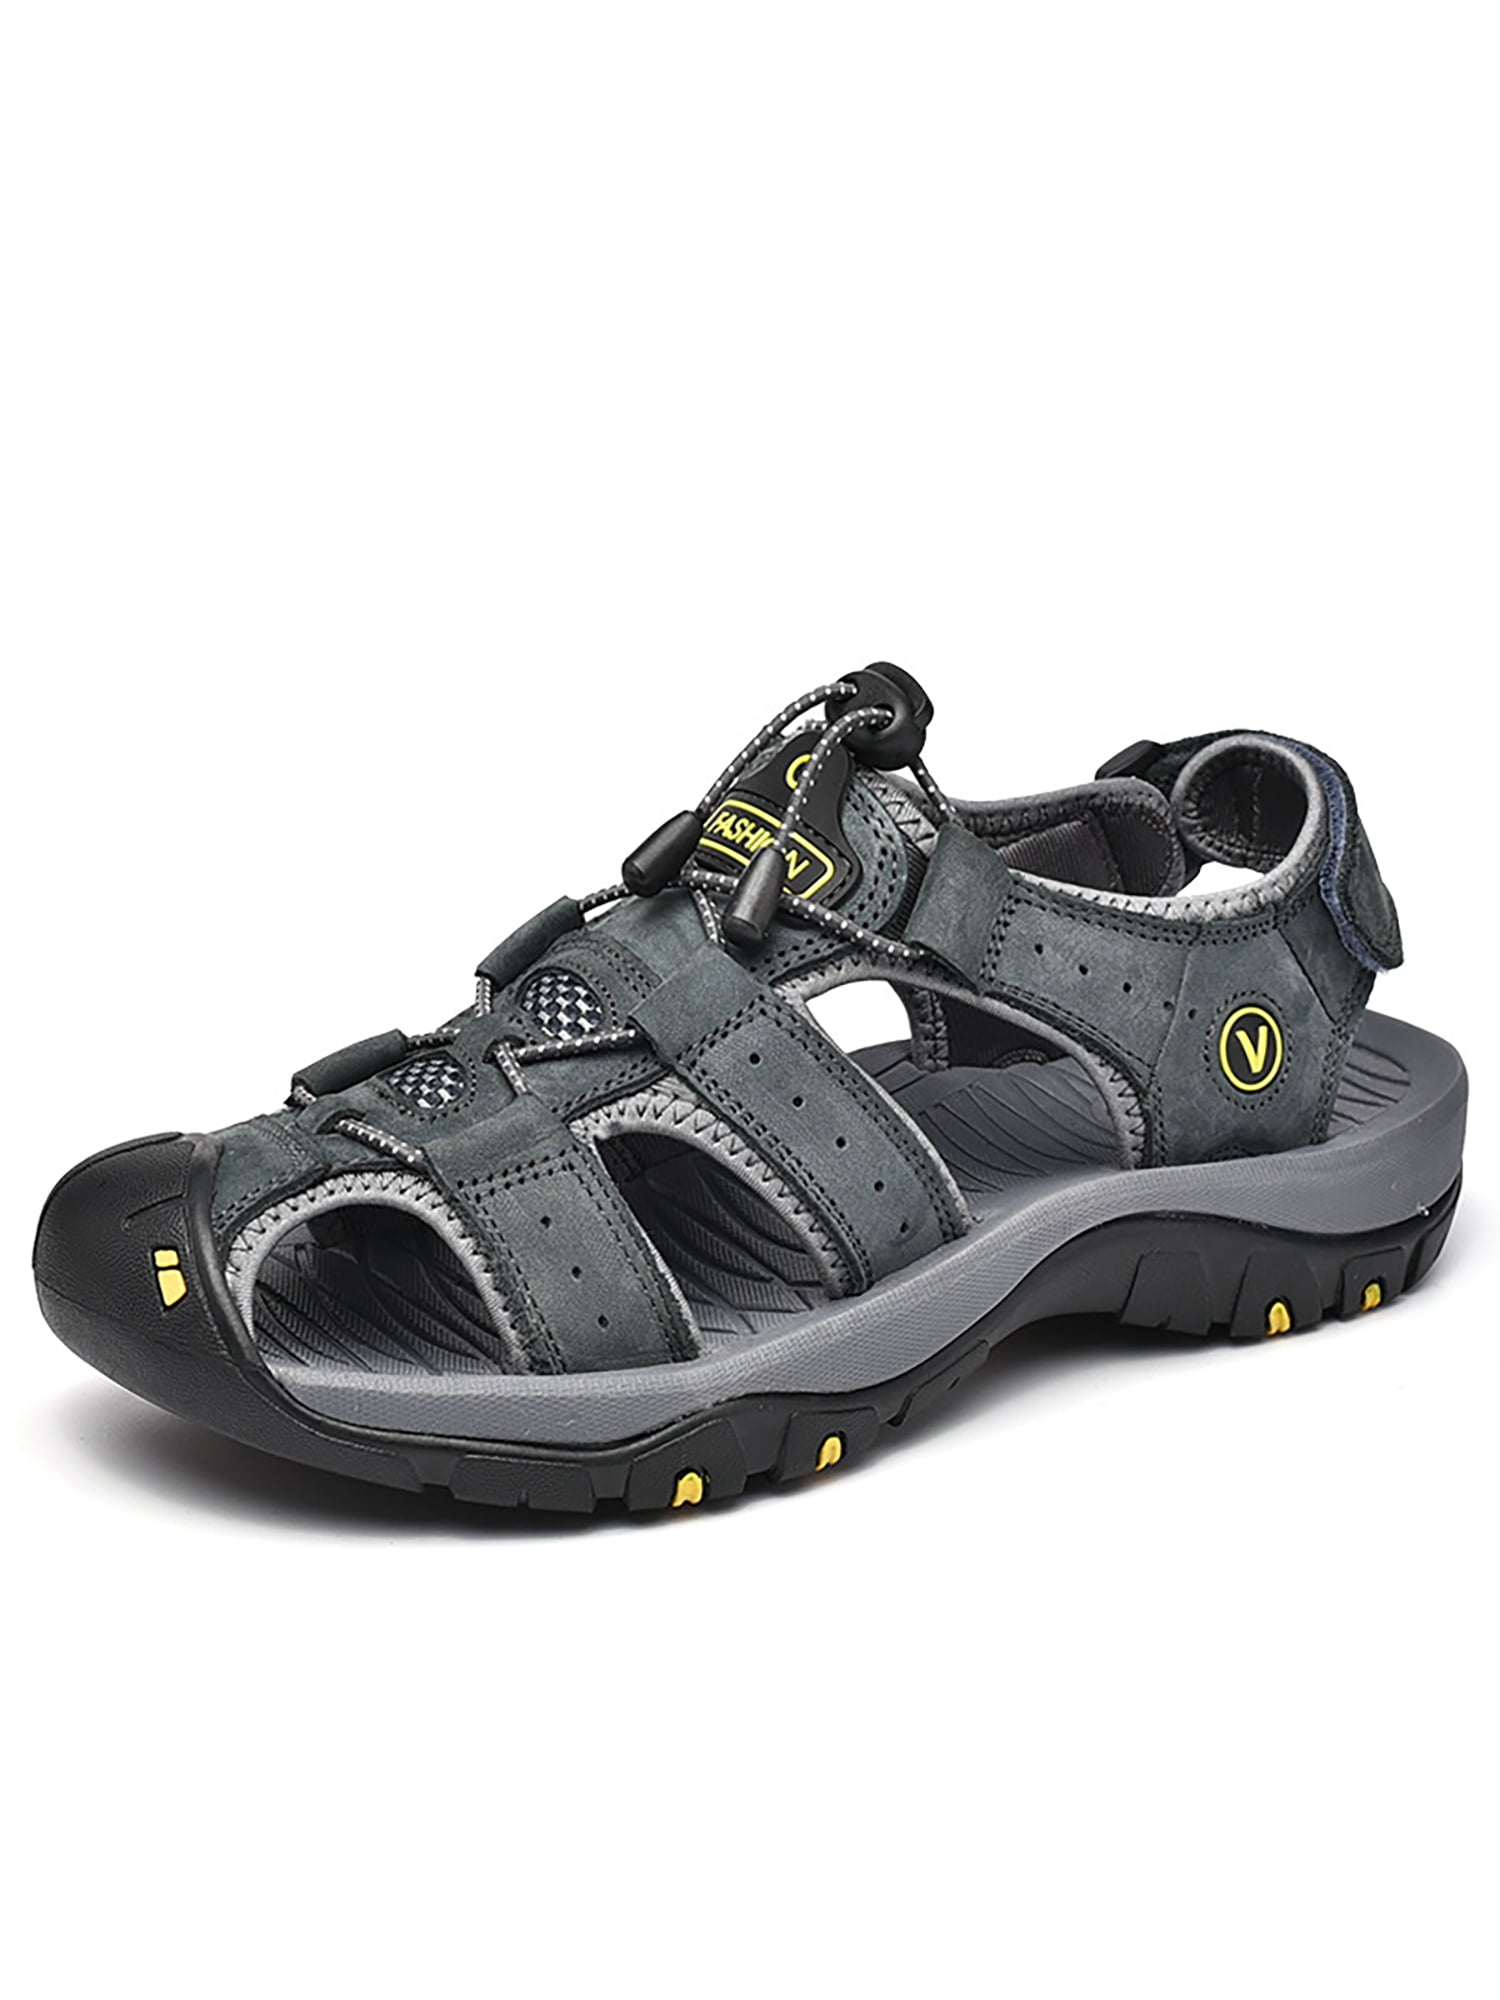 Mens Casual Hiking Genuine Closed-Toe Sandals Summer Sandals Outdoor Beach Shoes 